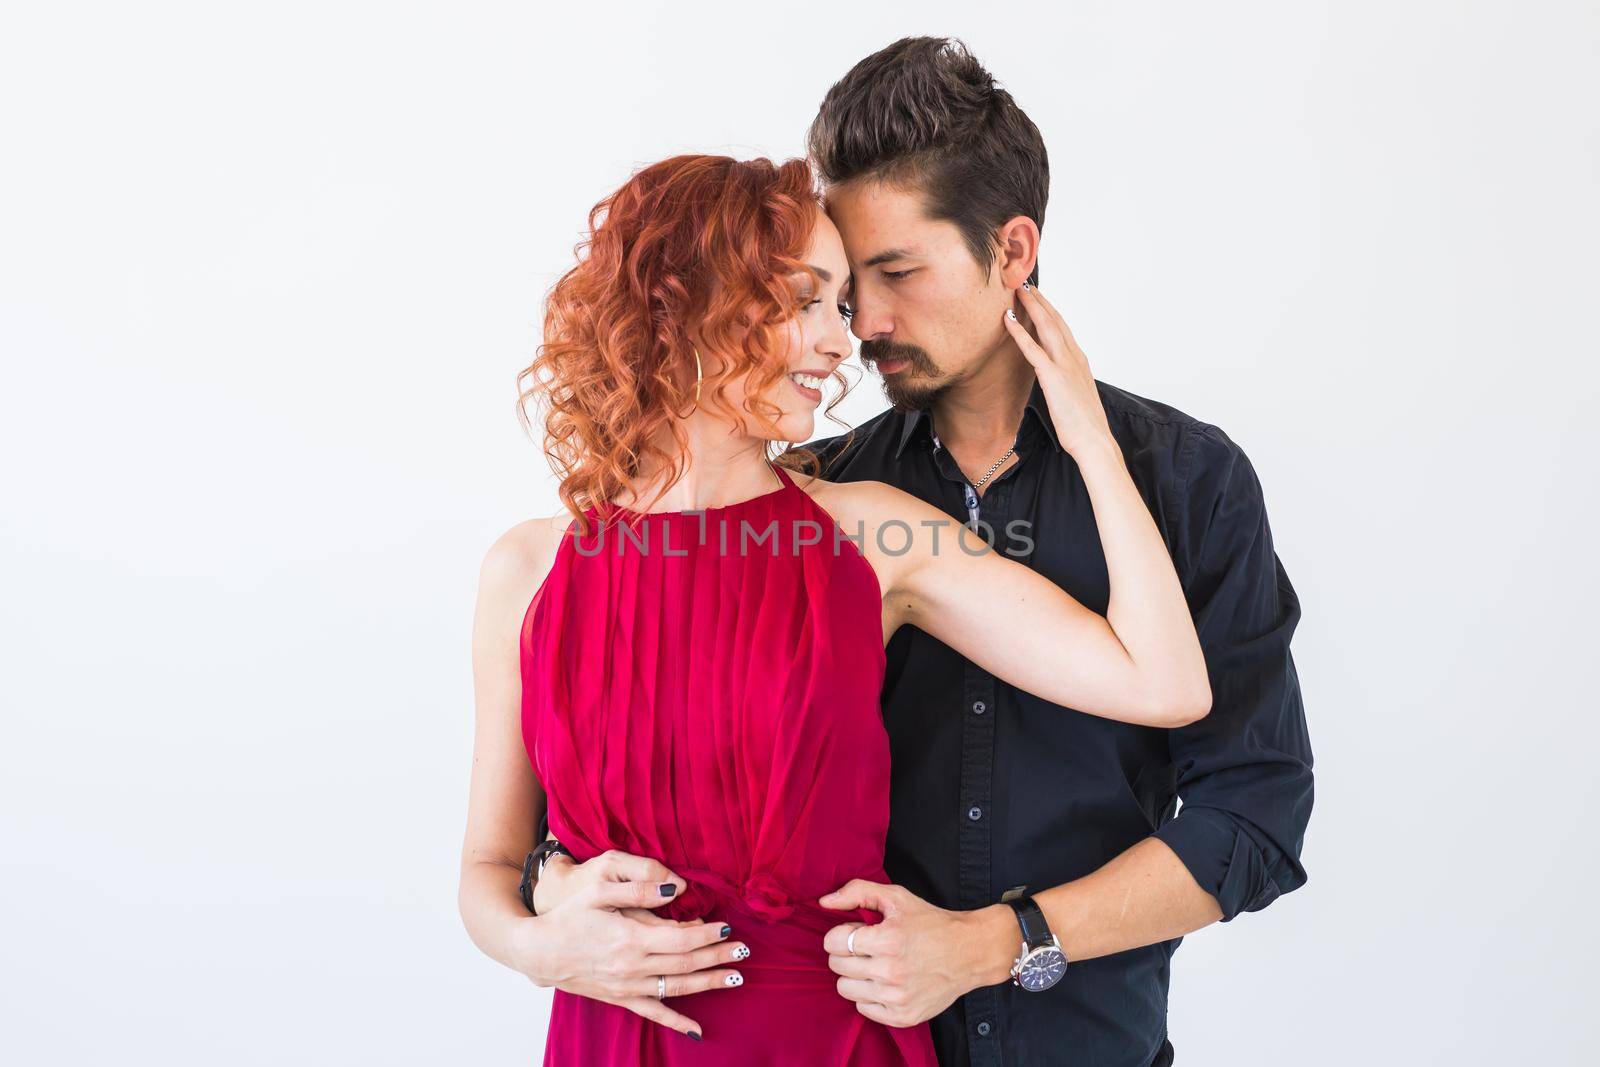 Social dance, bachata, kizomba, salsa, tango concept - Close up portrait of woman man dressed in beautiful outfits over white background.